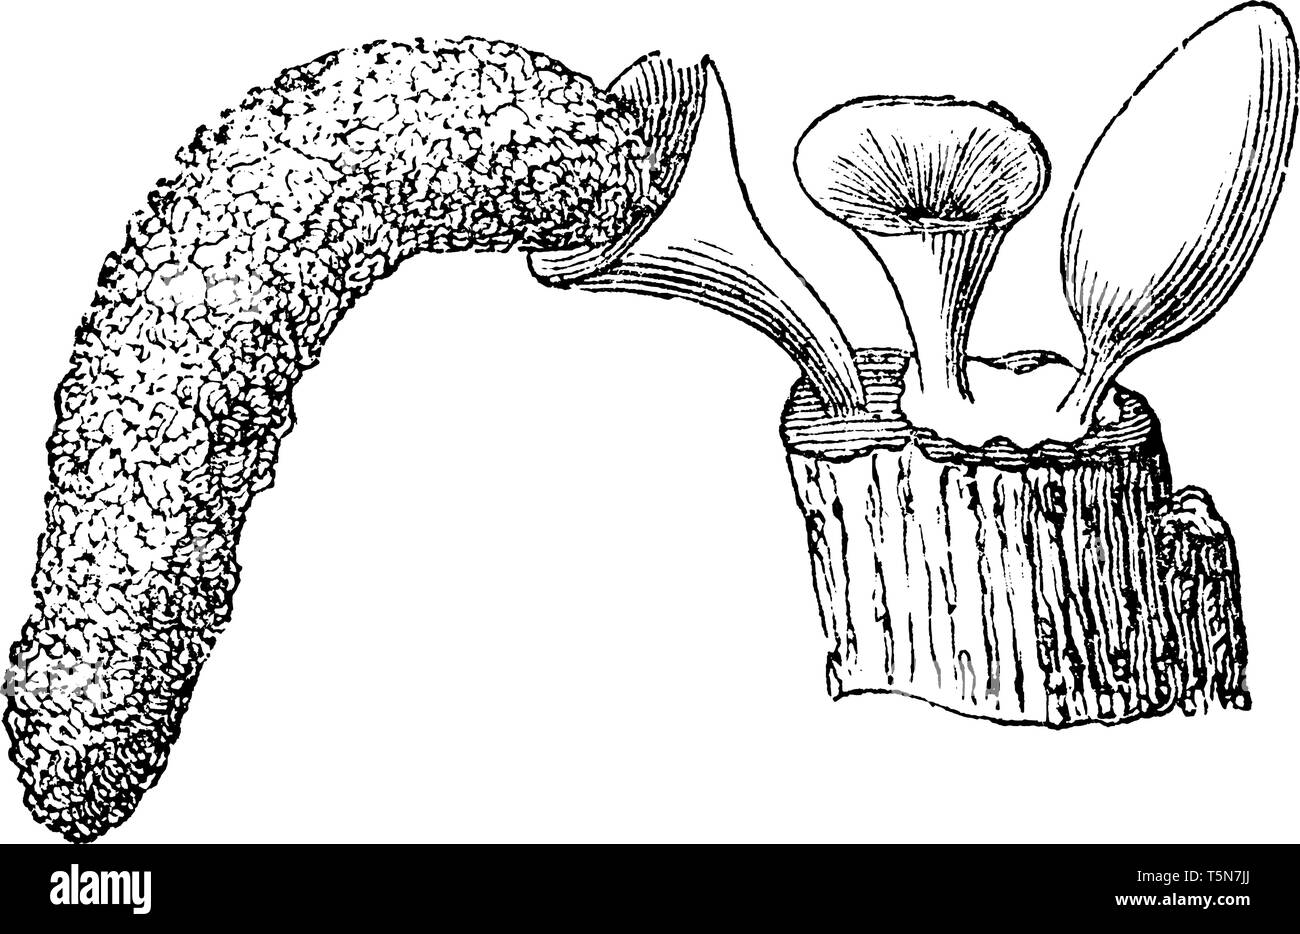 This is Arcyria flava Mushrooms. And Mushrooms growing on wood, vintage line drawing or engraving illustration. Stock Vector